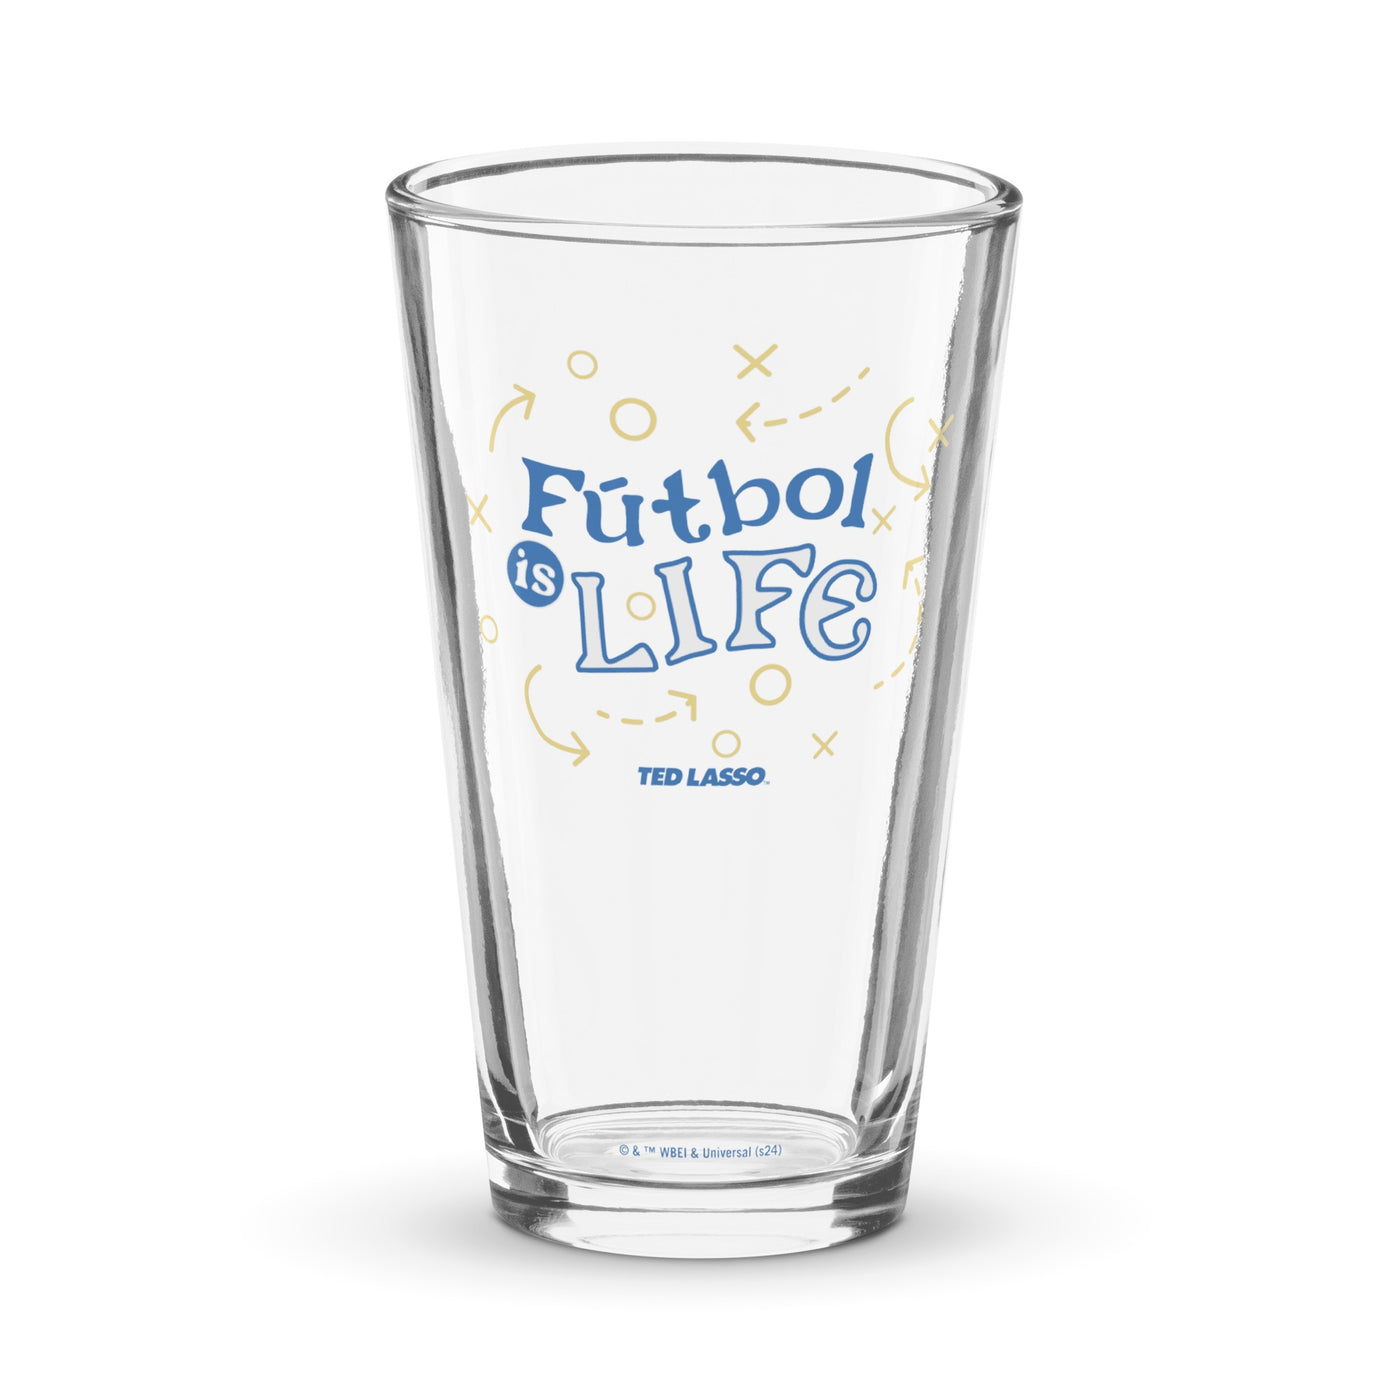 Ted Lasso Fútbol is Life 16 oz Pint Glass